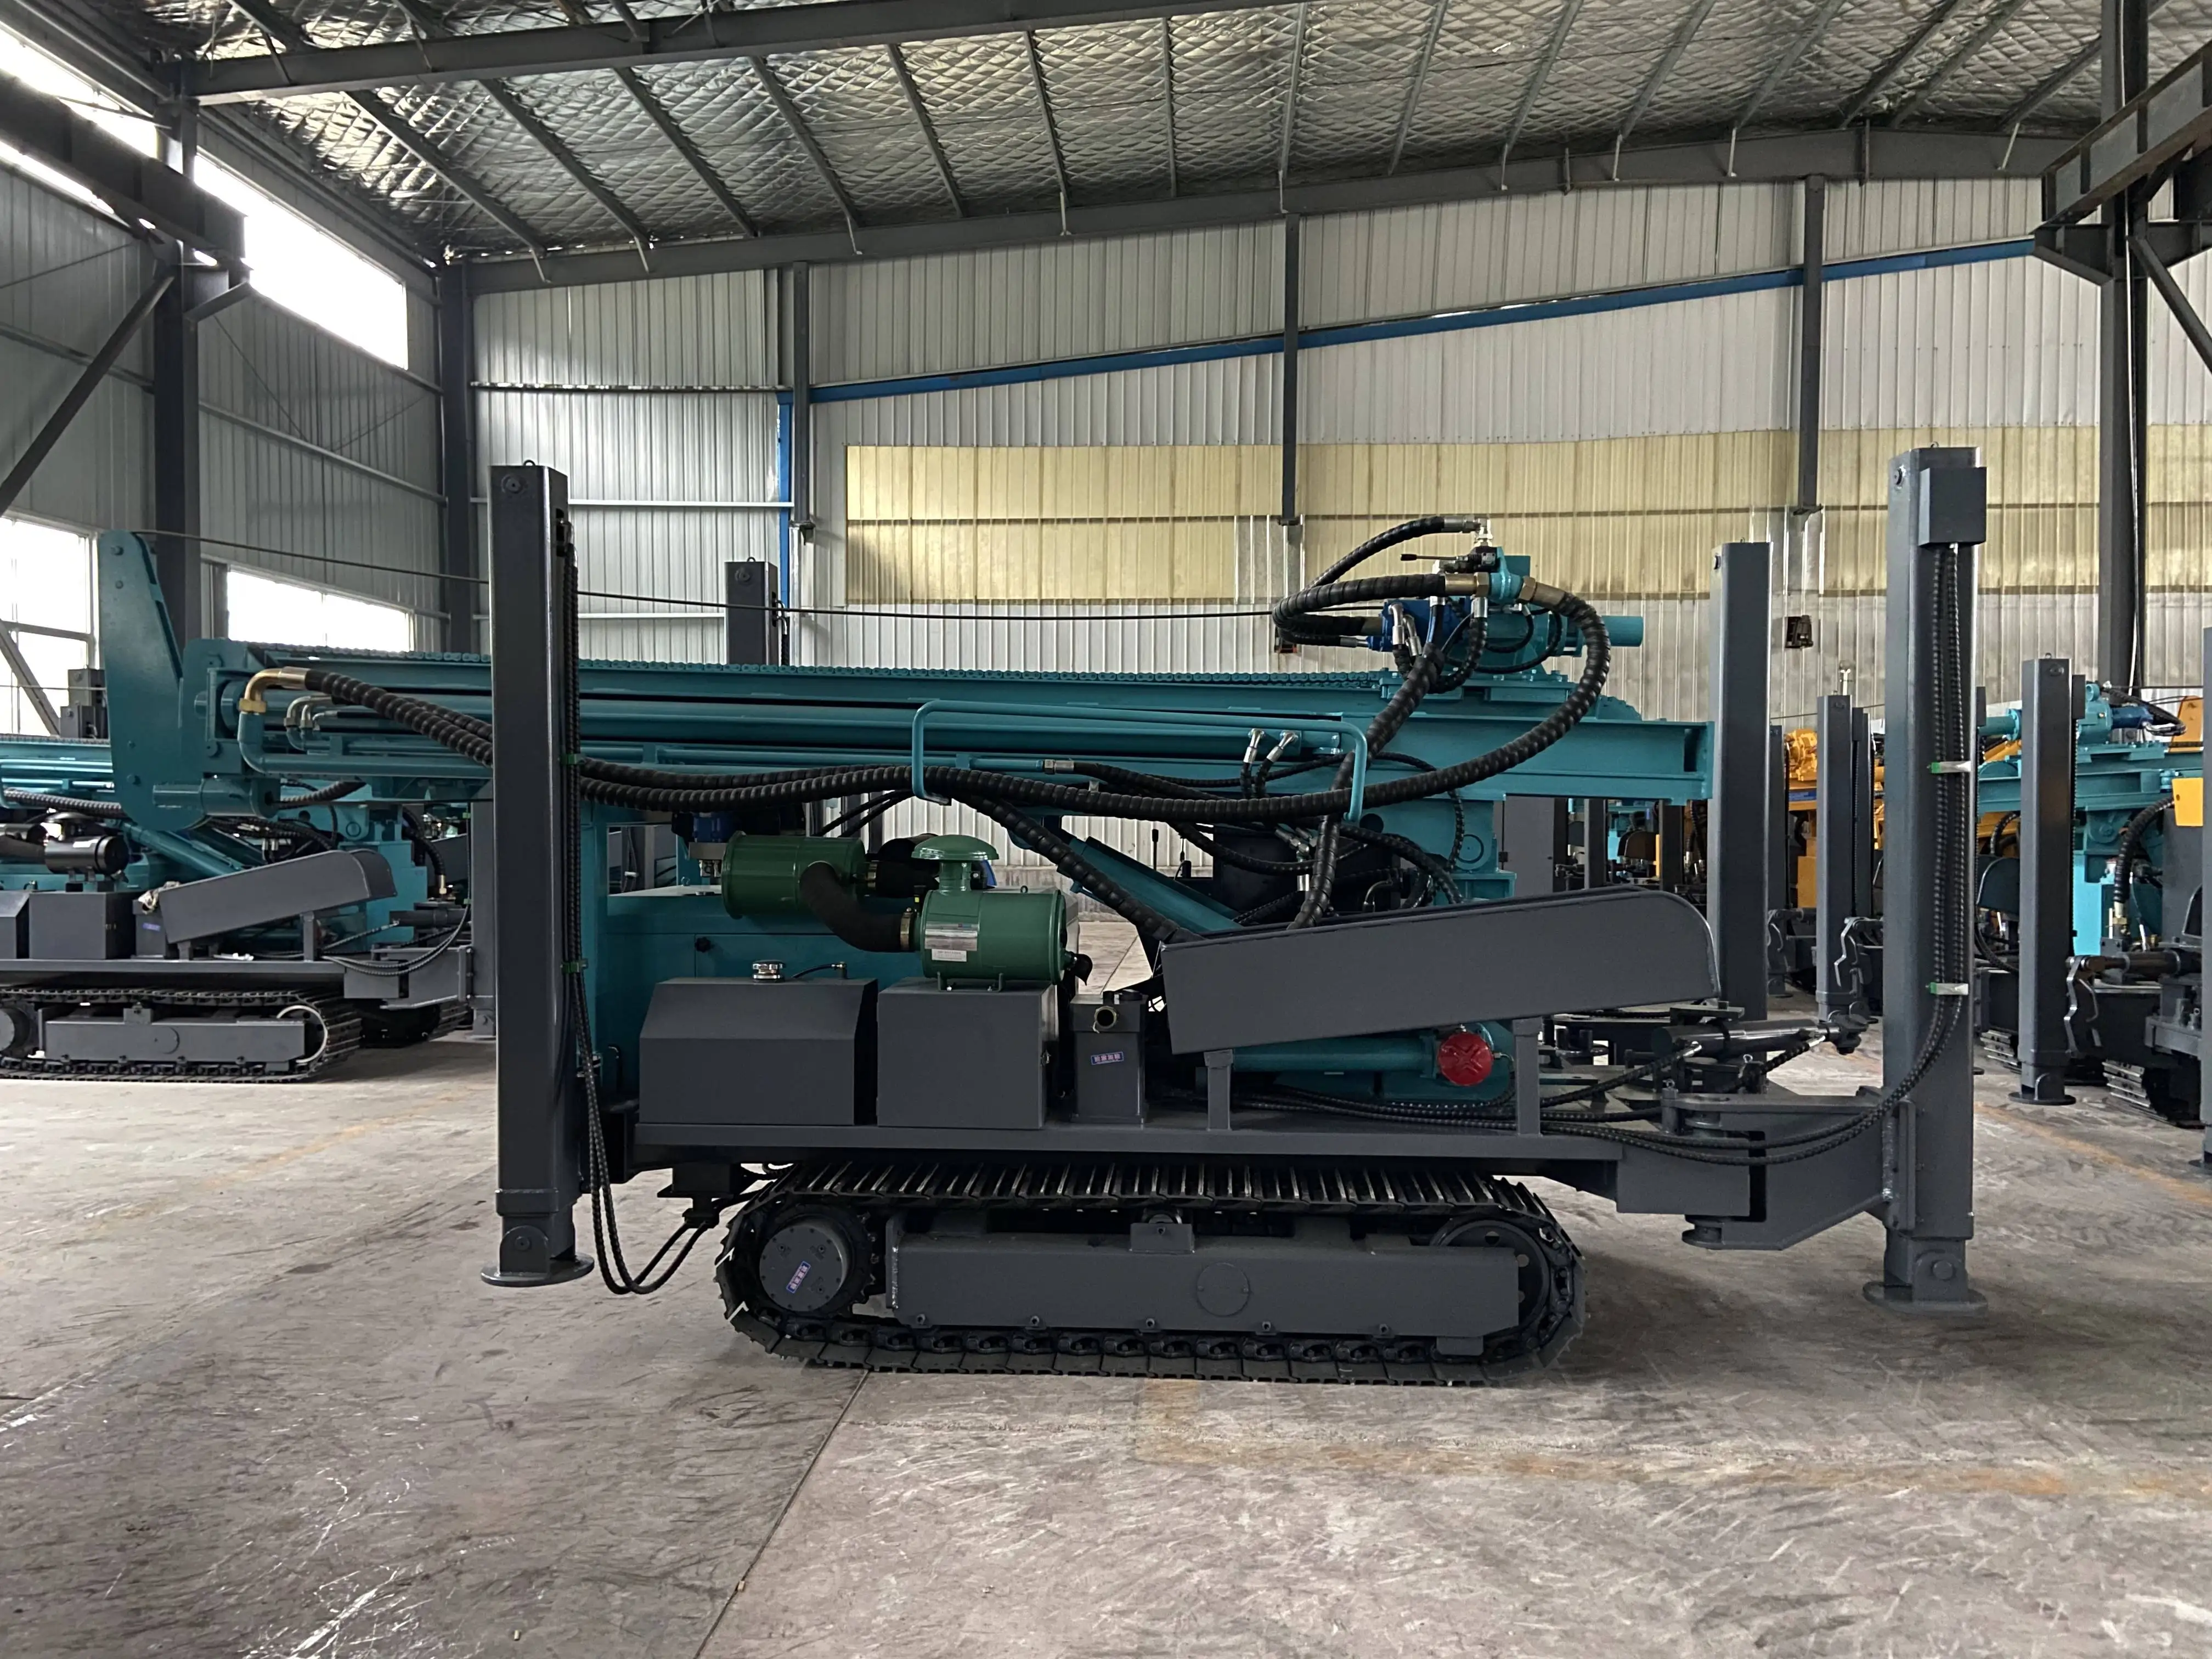 HWH450 450m drilling depth 103KW portable diesel water well drilling rig crawler hydraulic rotary water well drilling rig